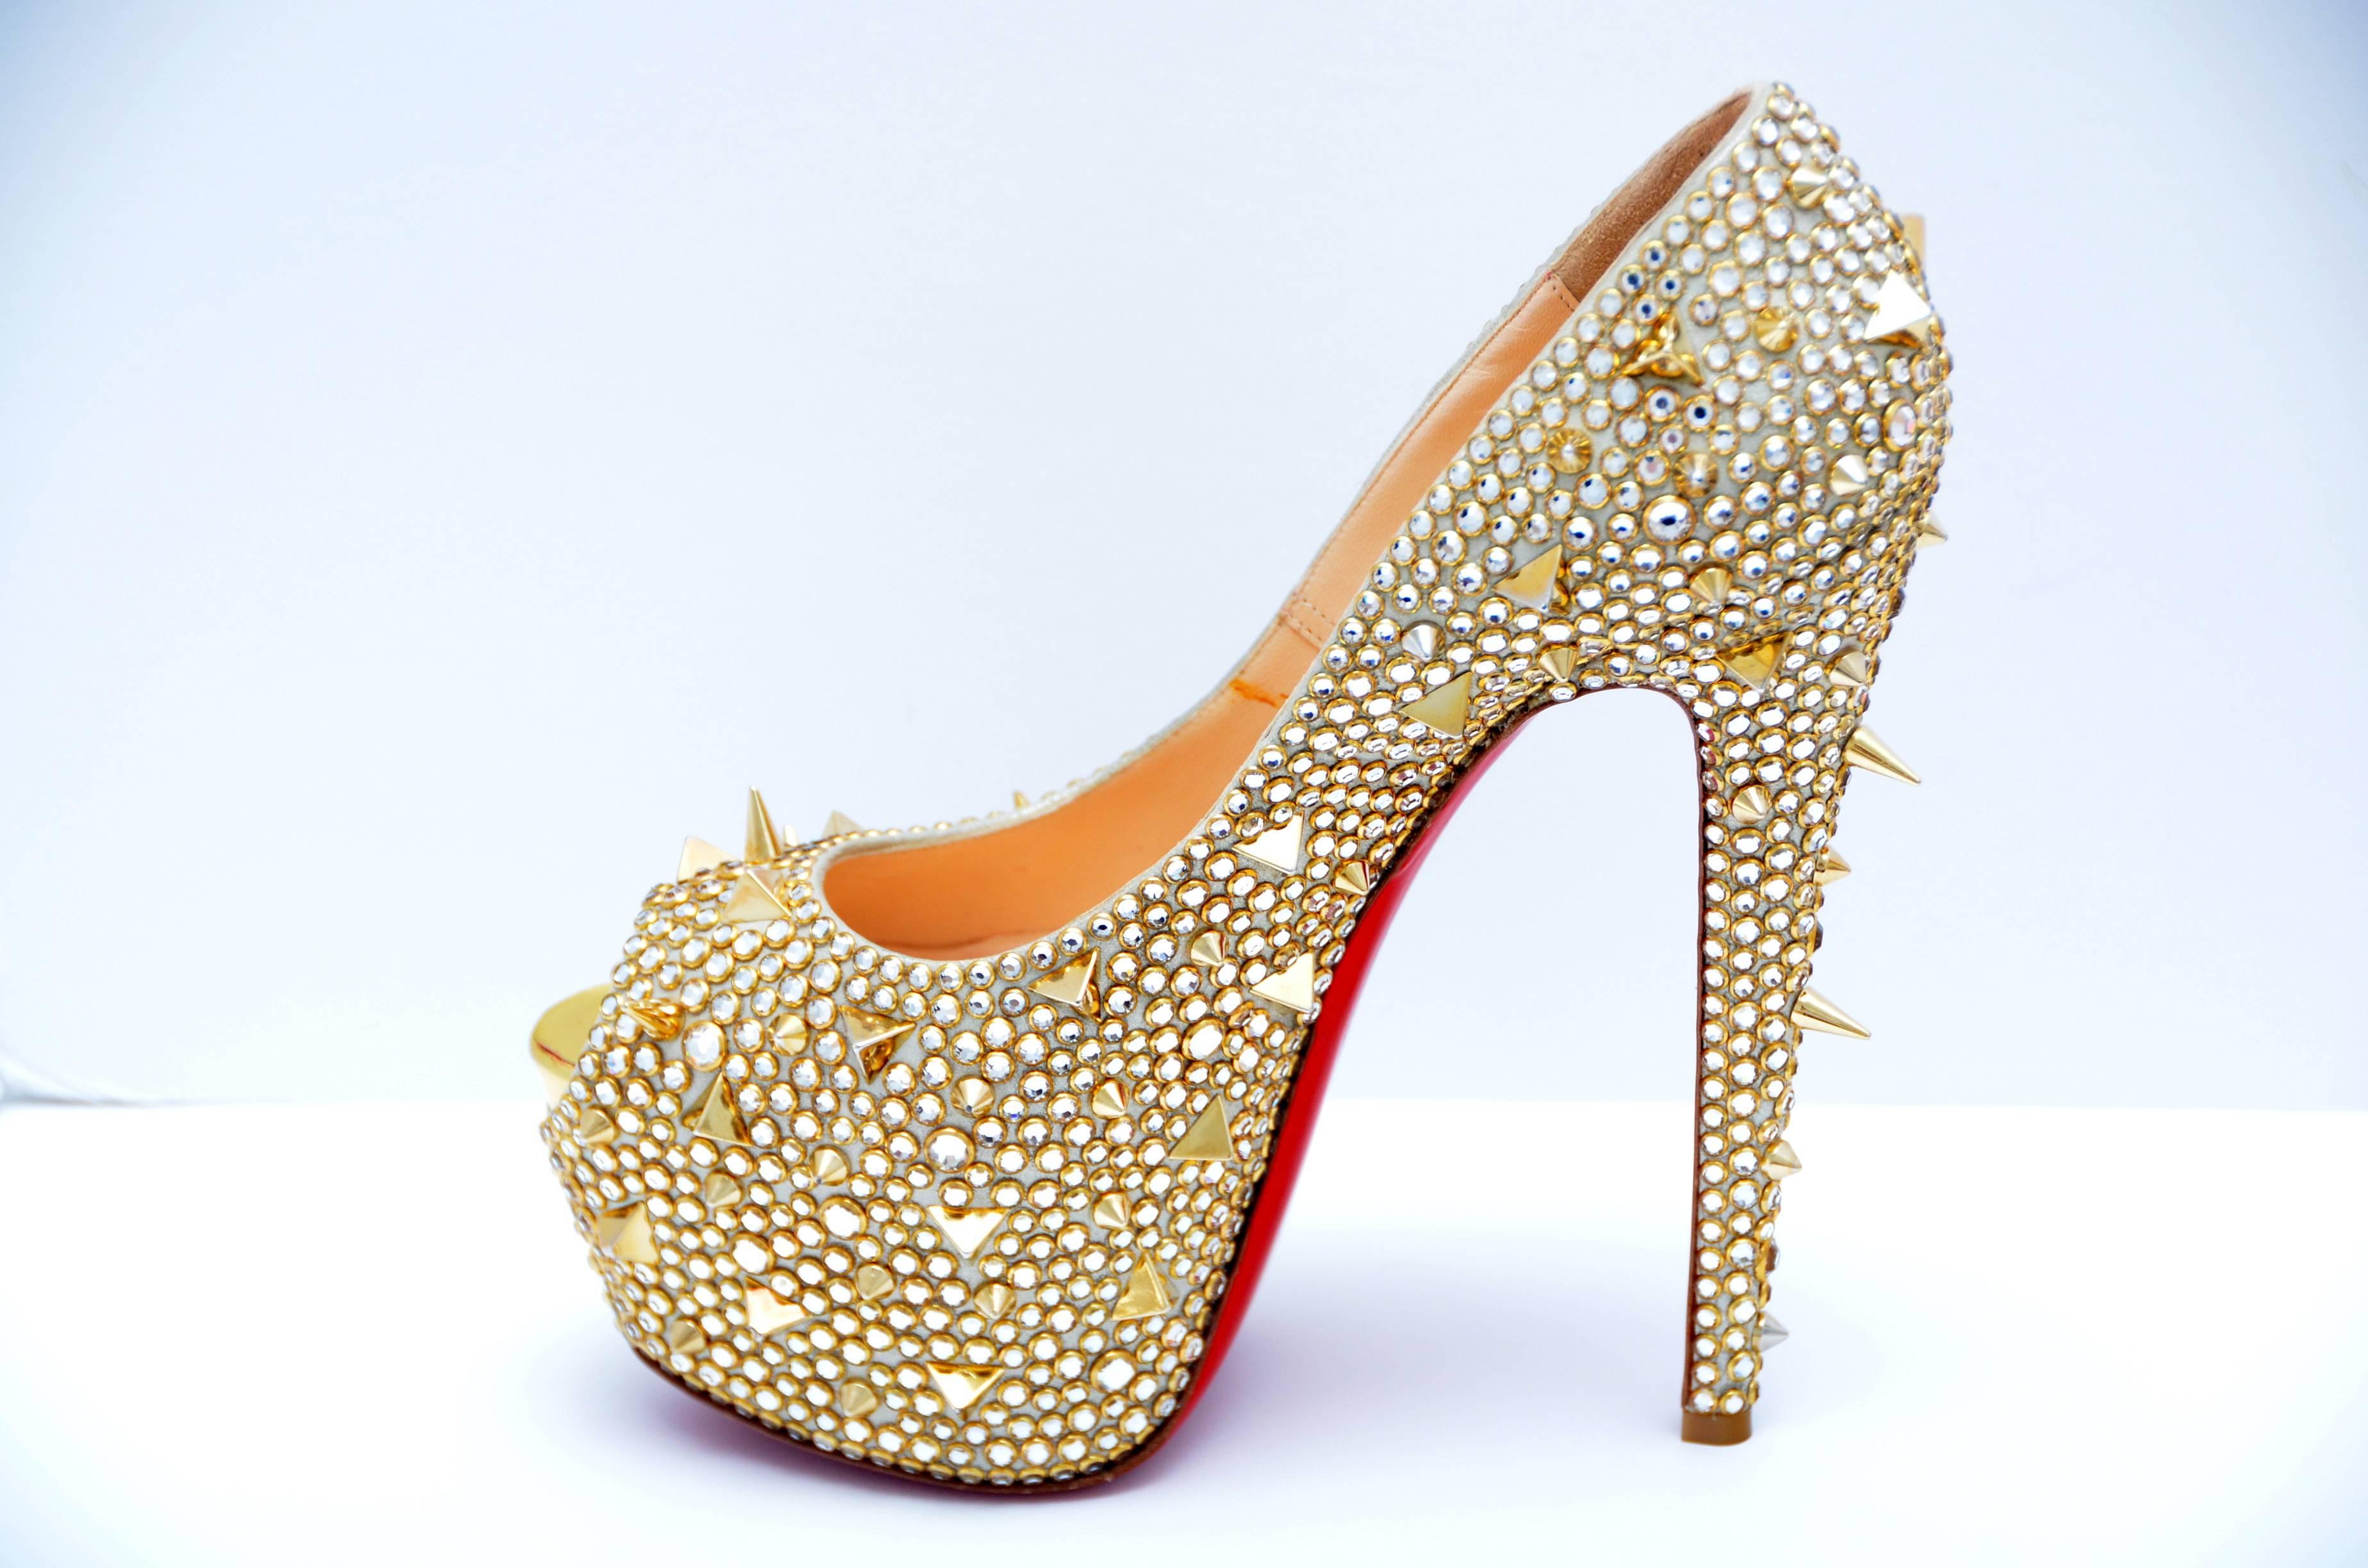 Gold Christian Louboutin Highness Strass Embellished Peep-toe Platform Pumps from the  Khloe Kardashian  closet .
She wore these  at 